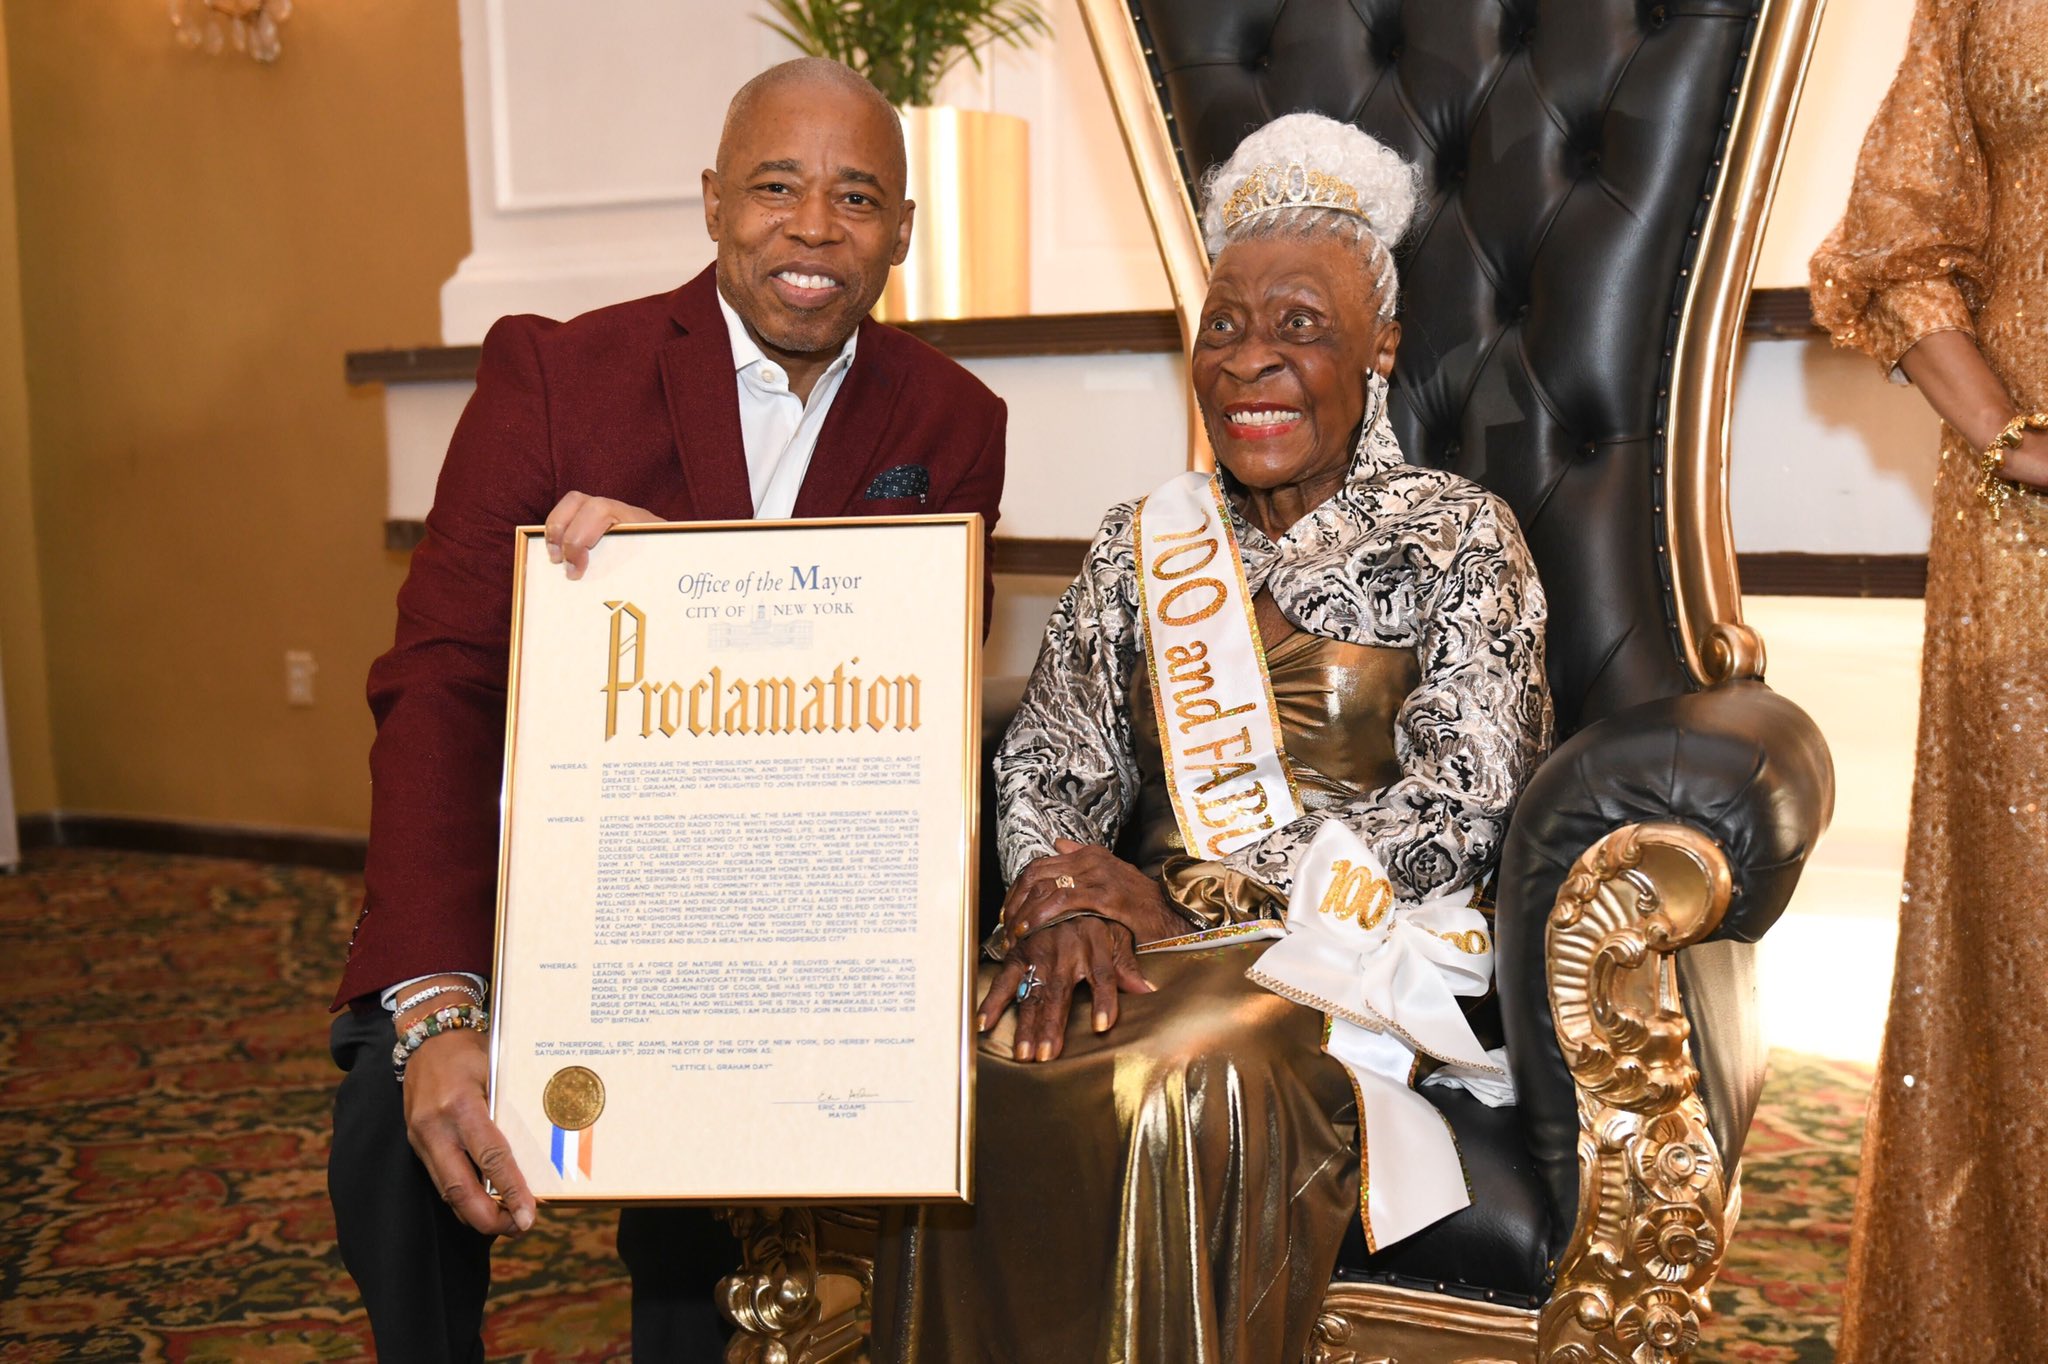 PHOTO: Lettice Graham is celebrated on her 100th birthday by New York City Mayor Eric Adams in image posted to Mayor Adams' Twitter account. Graham turned 100 years old on Feb. 5, 2022.